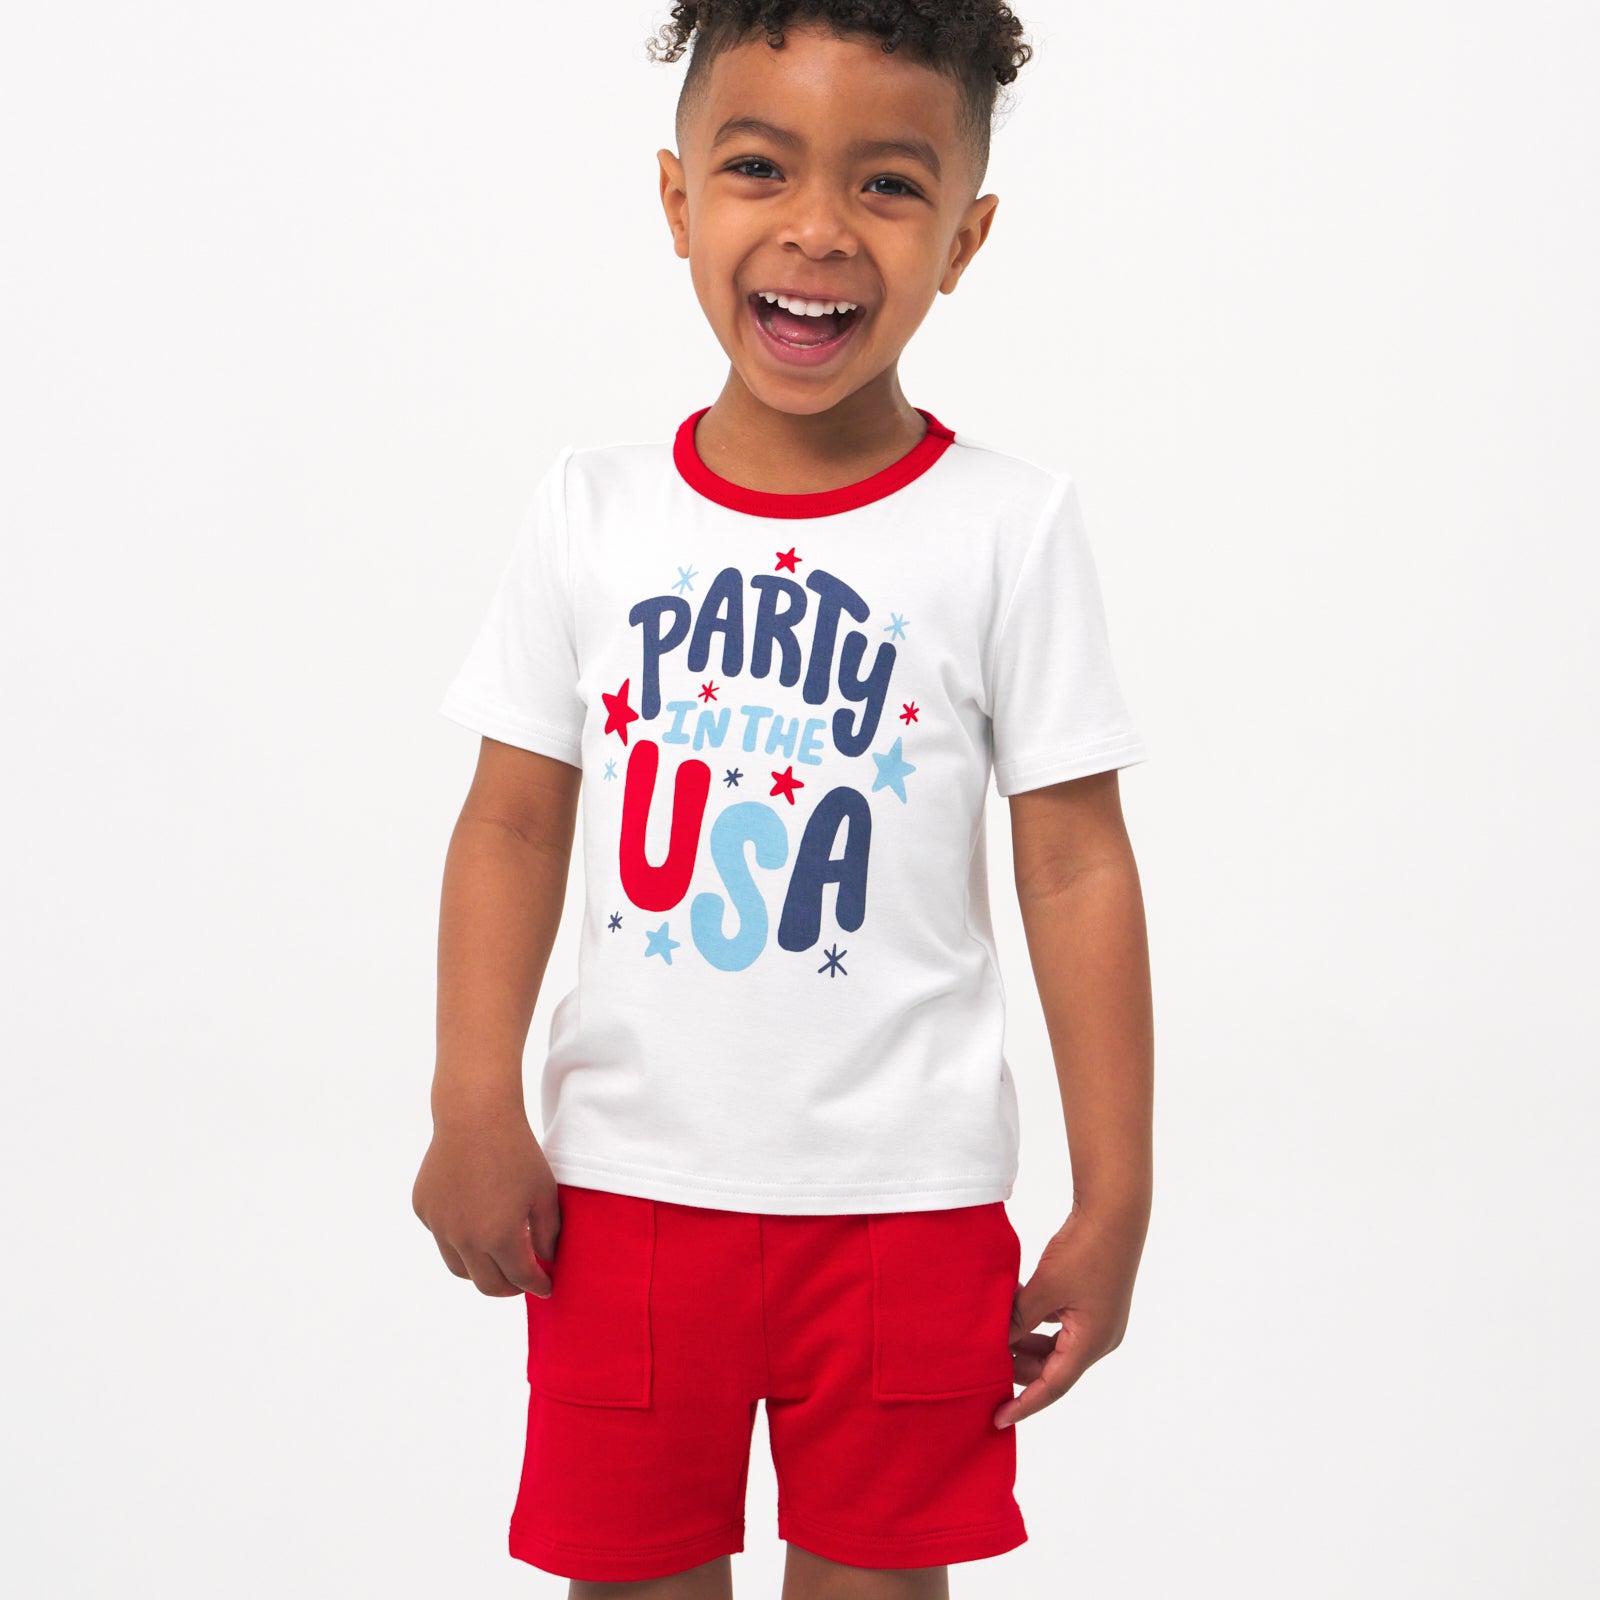 Child wearing Candy Red shorts and coordinating Play top